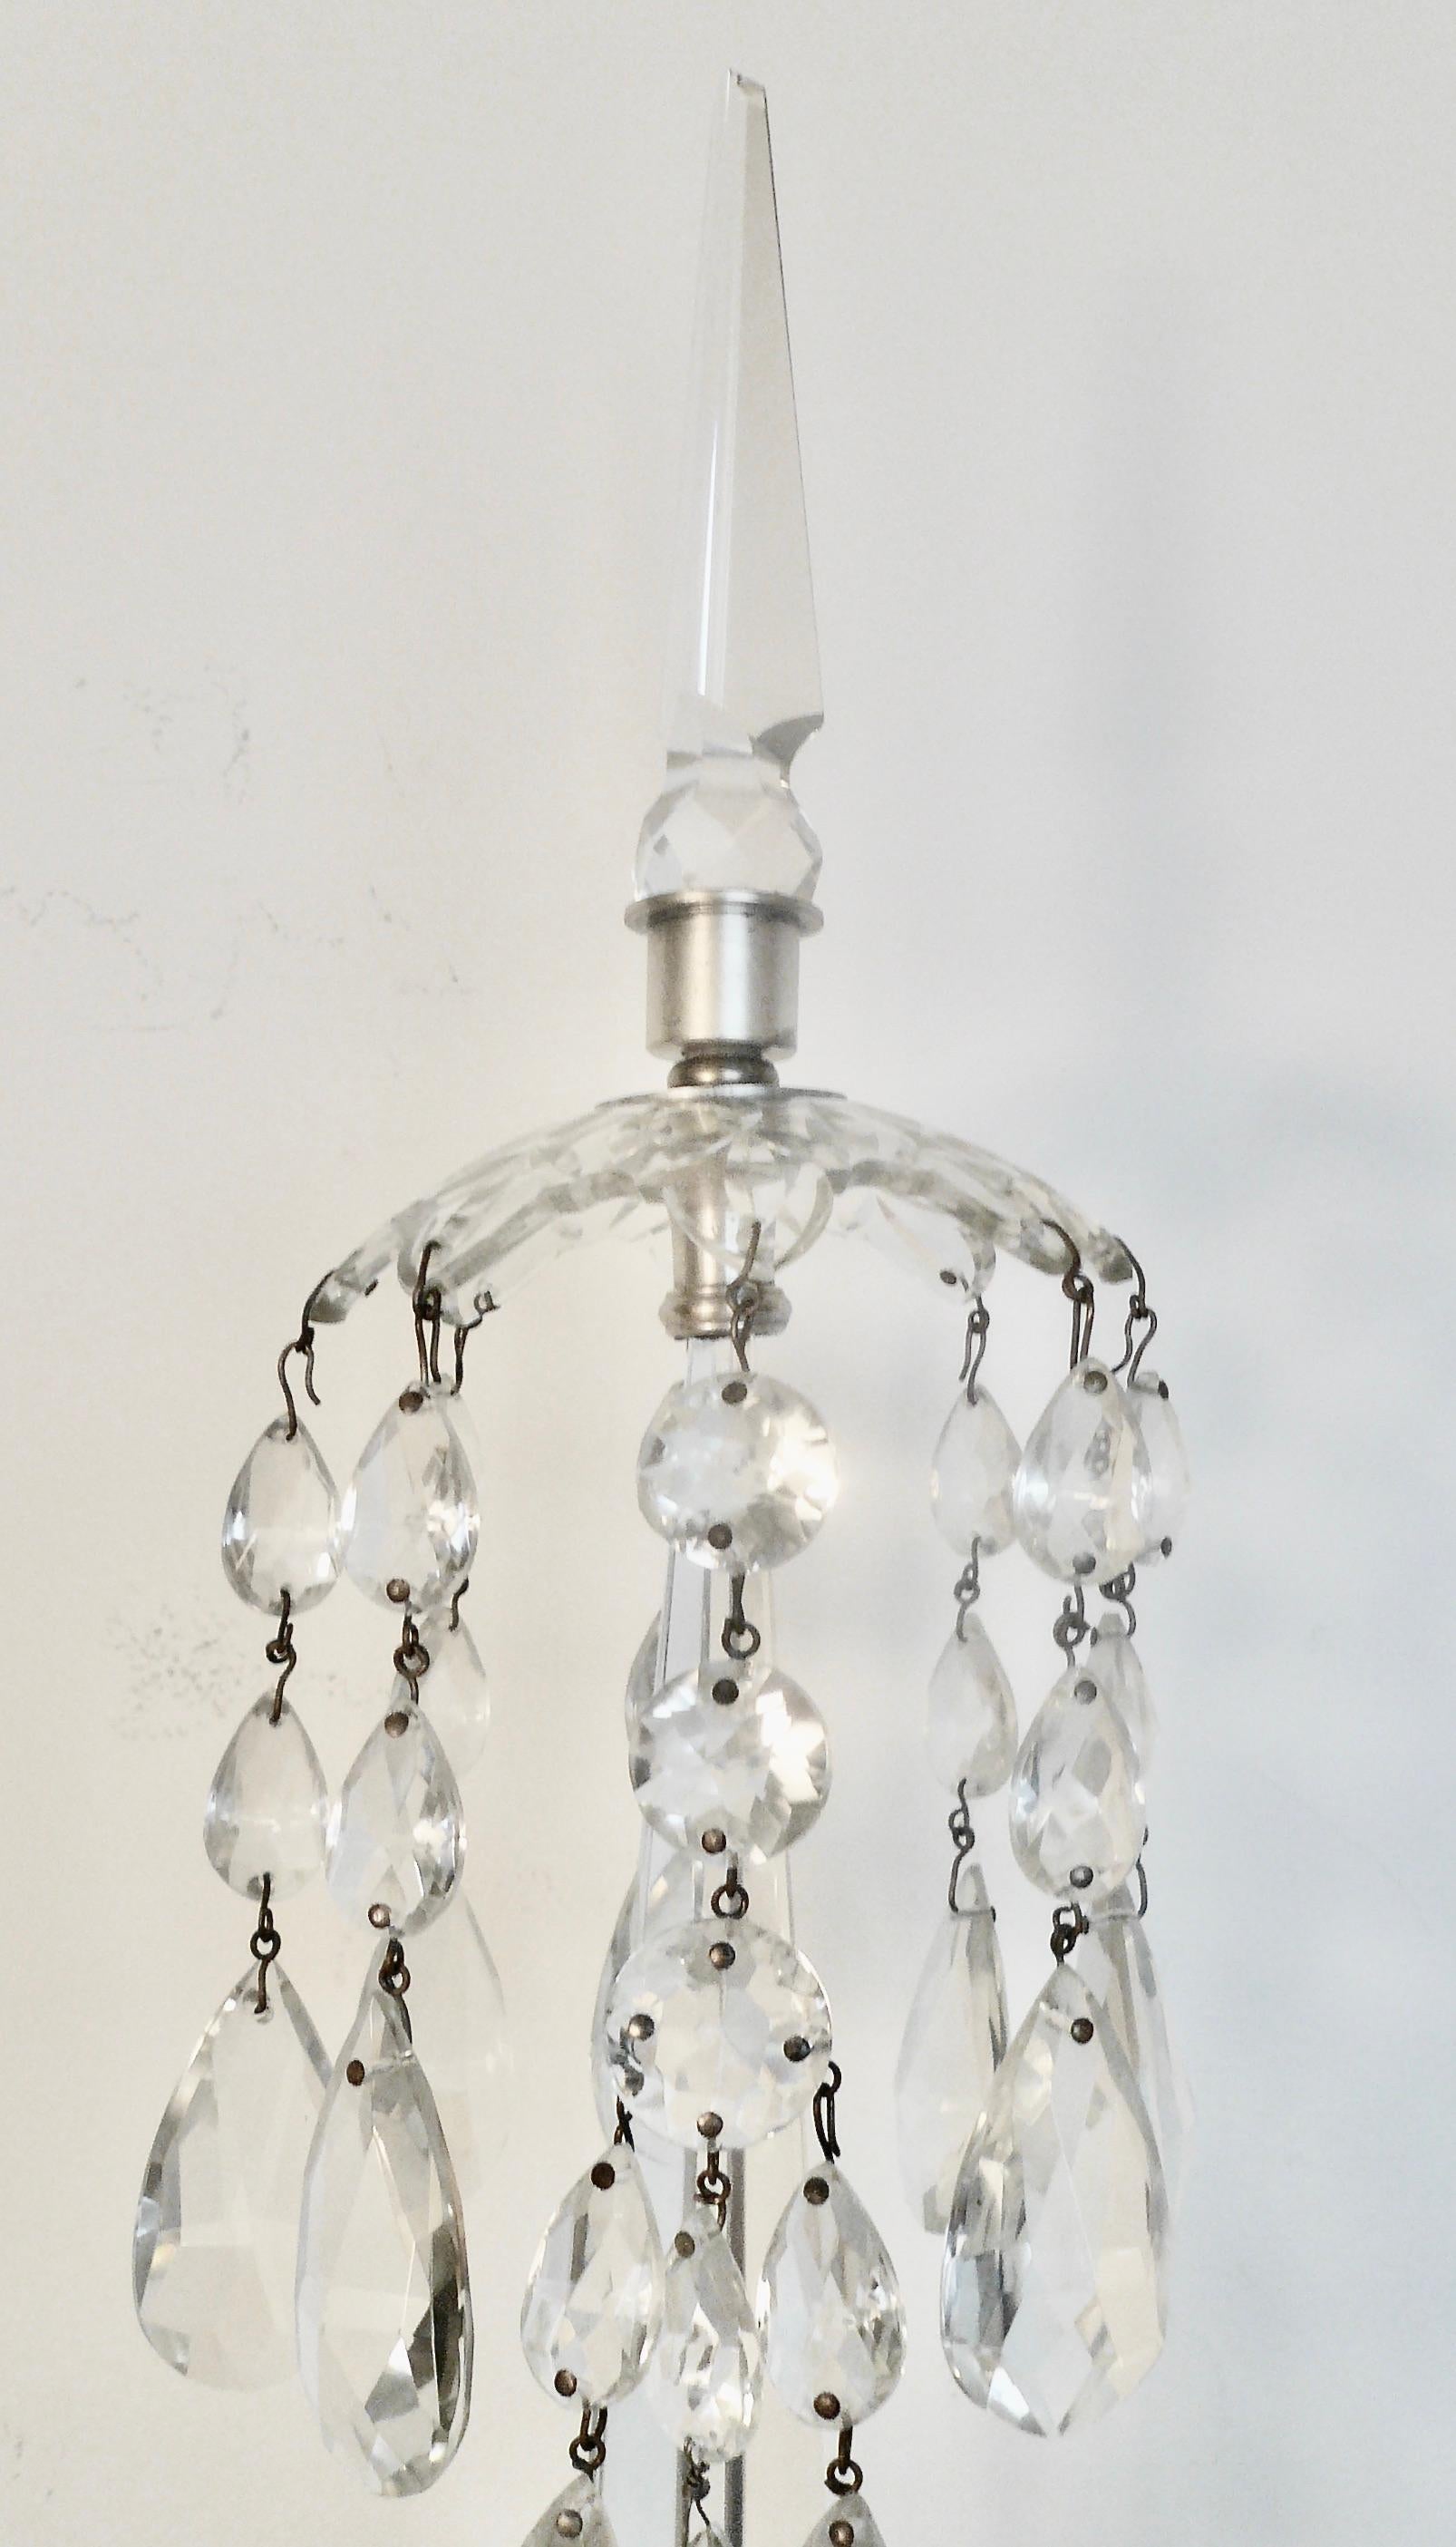 A Grand Scale Pair Cut Crystal Georgian Design Sconces in the Waterford Style For Sale 3